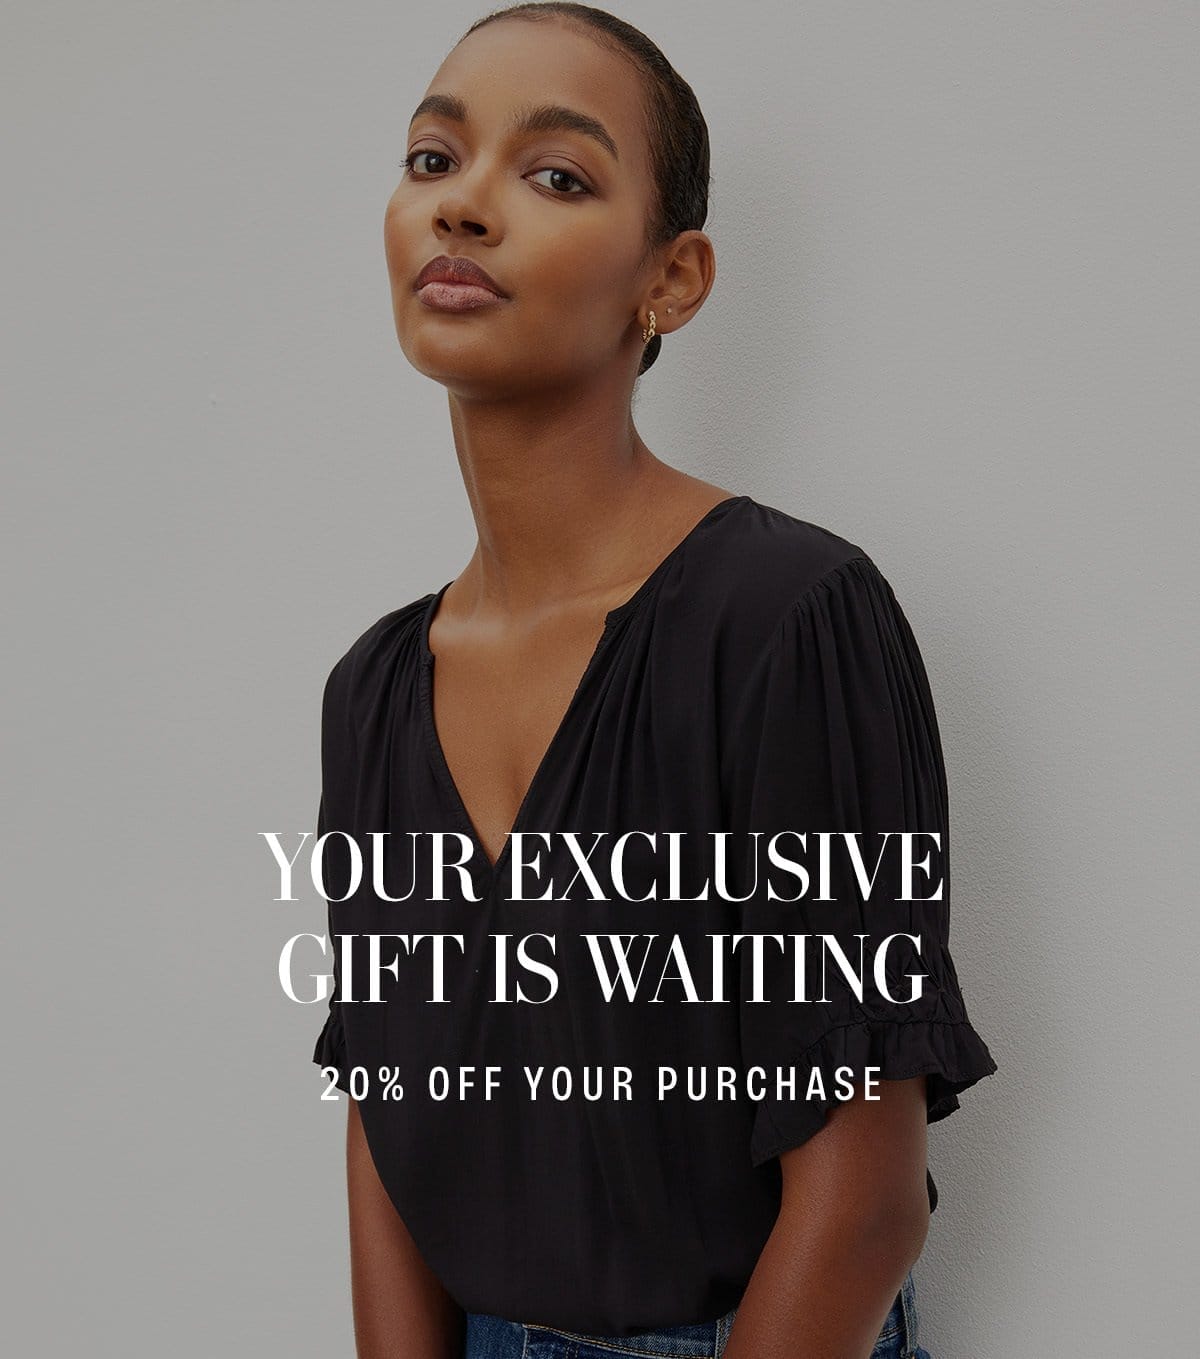 YOUR EXCLUSIVE GIFT IS WAITING. 20% OFF YOUR PURCHASE. CODE: EXCLUSIVE20